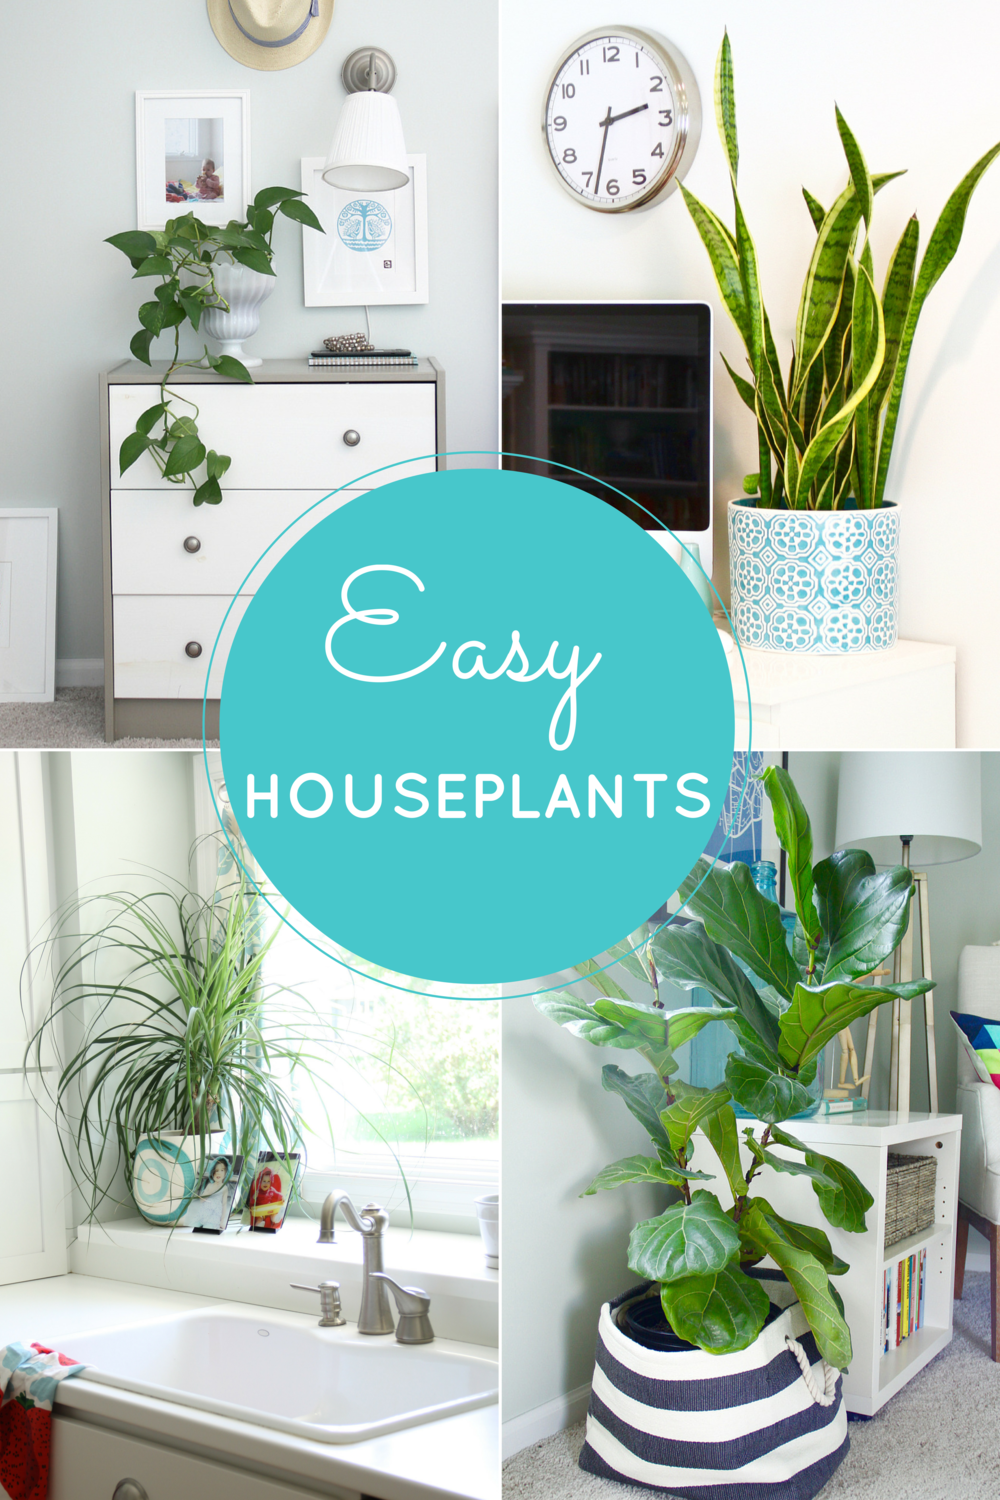 Easy Houseplants: 4 Indoor Plants to Beautify Your Spaces